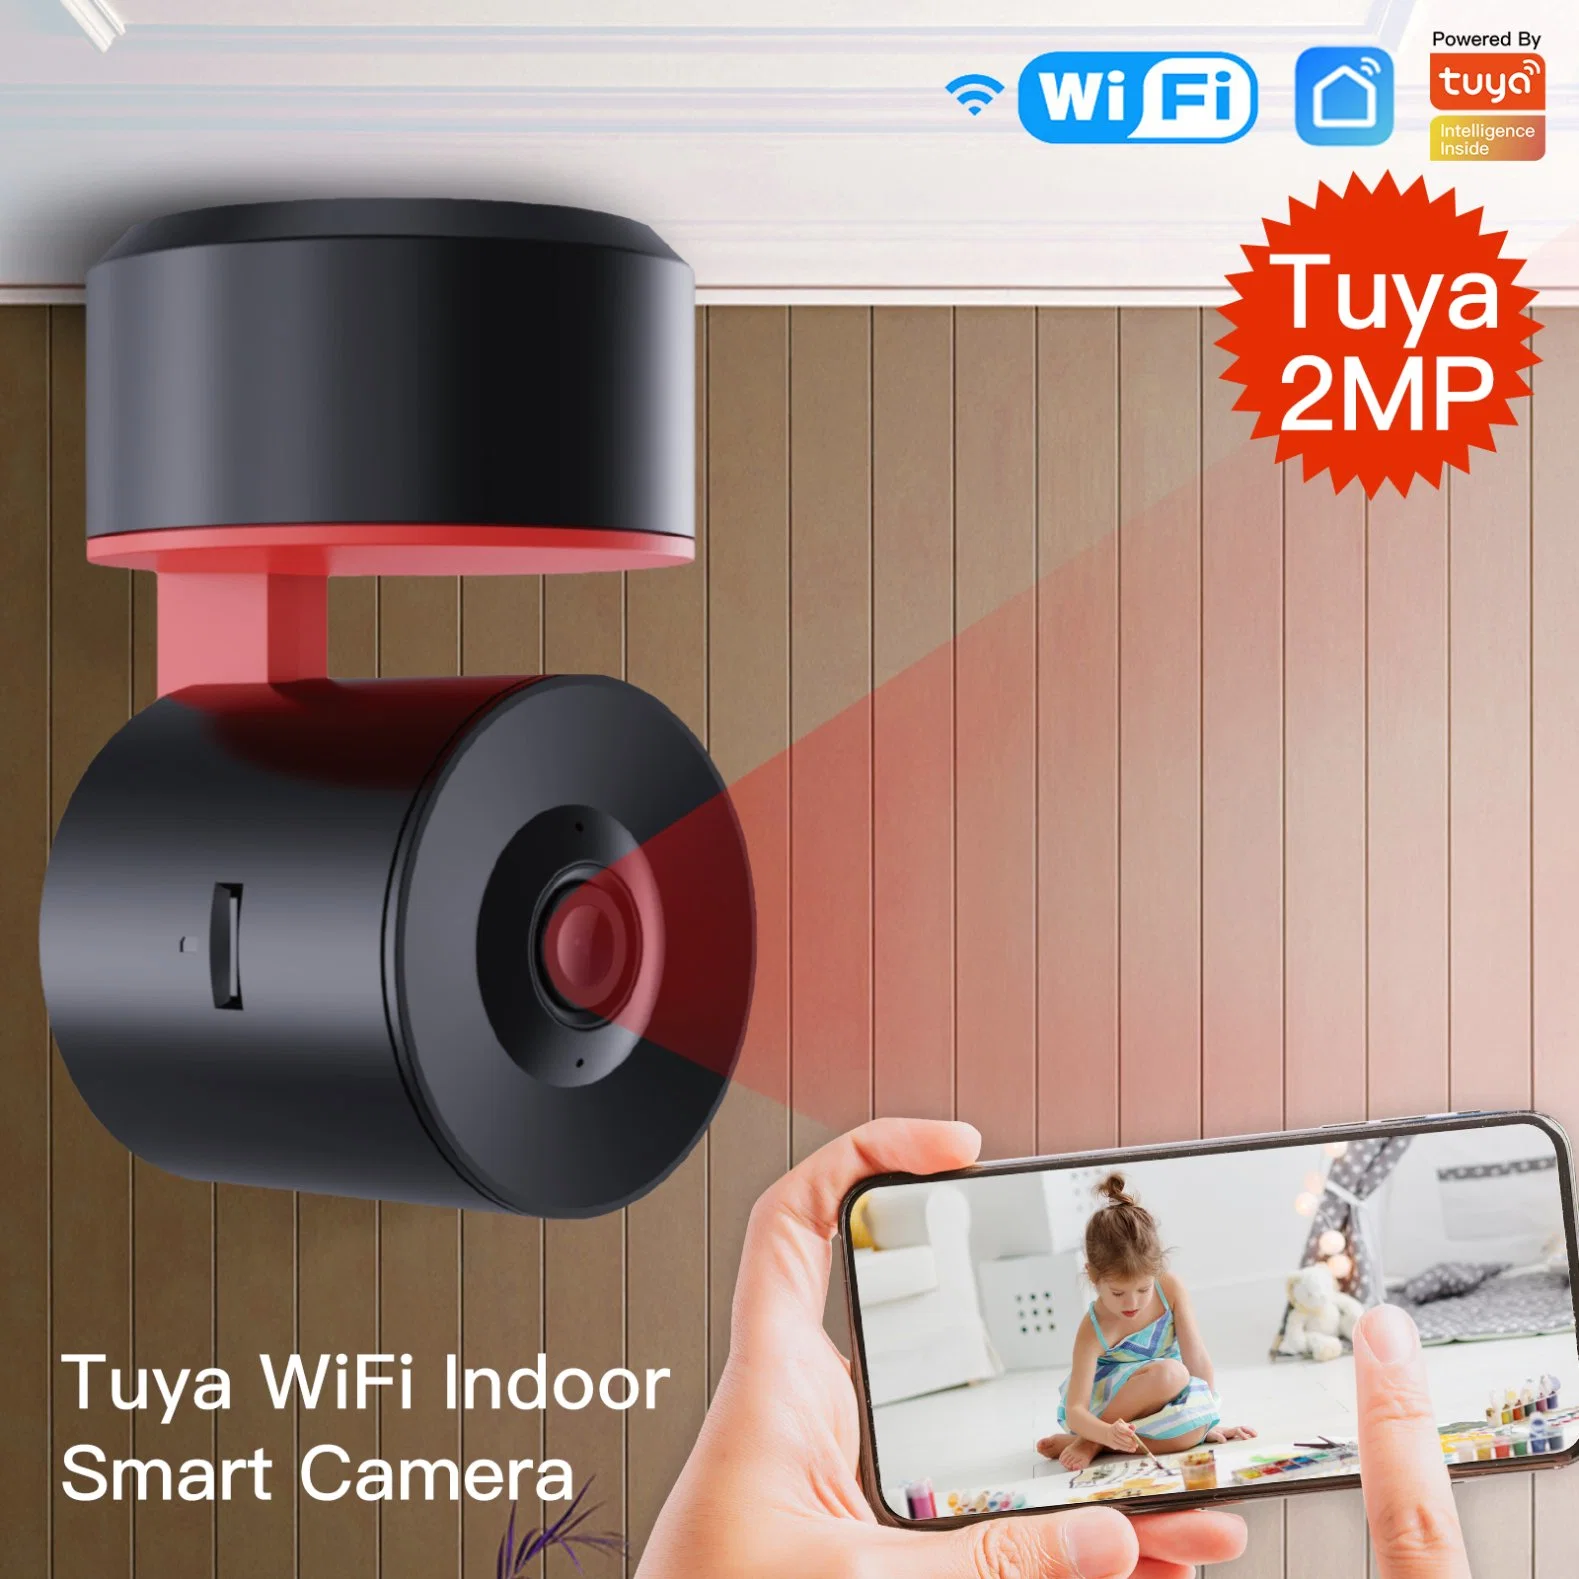 Tuya PTZ WiFi IP Camera Indoor Smart Automatic Tracking 1080P Wireless Security Camera Ai Human Detection for Home Surveillance Two-Way Audio and Cloud Storage